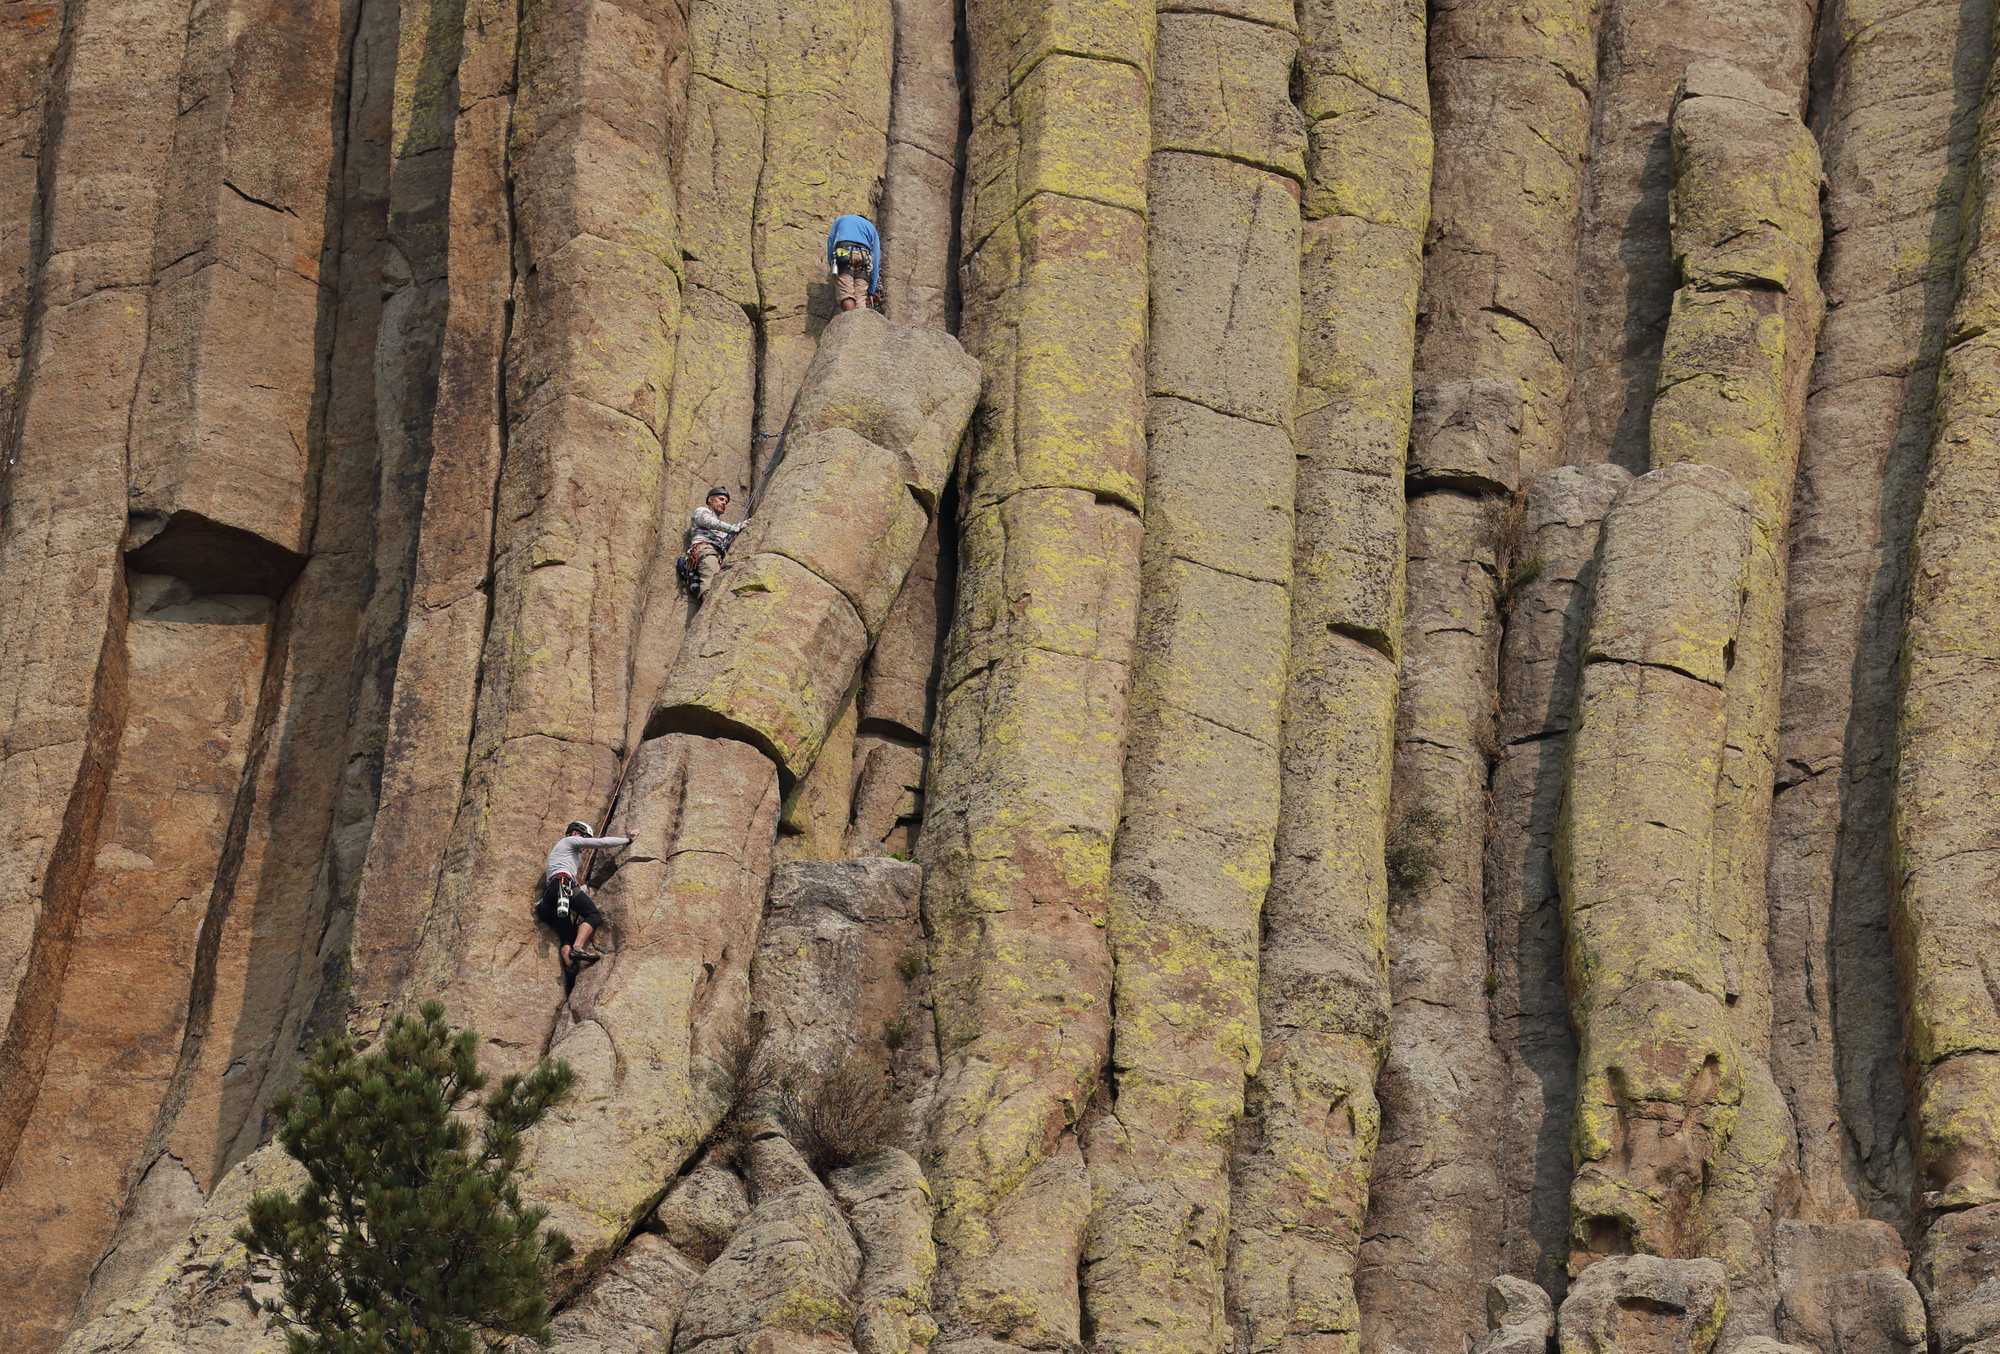  Climbers scaled Devils Tower. 